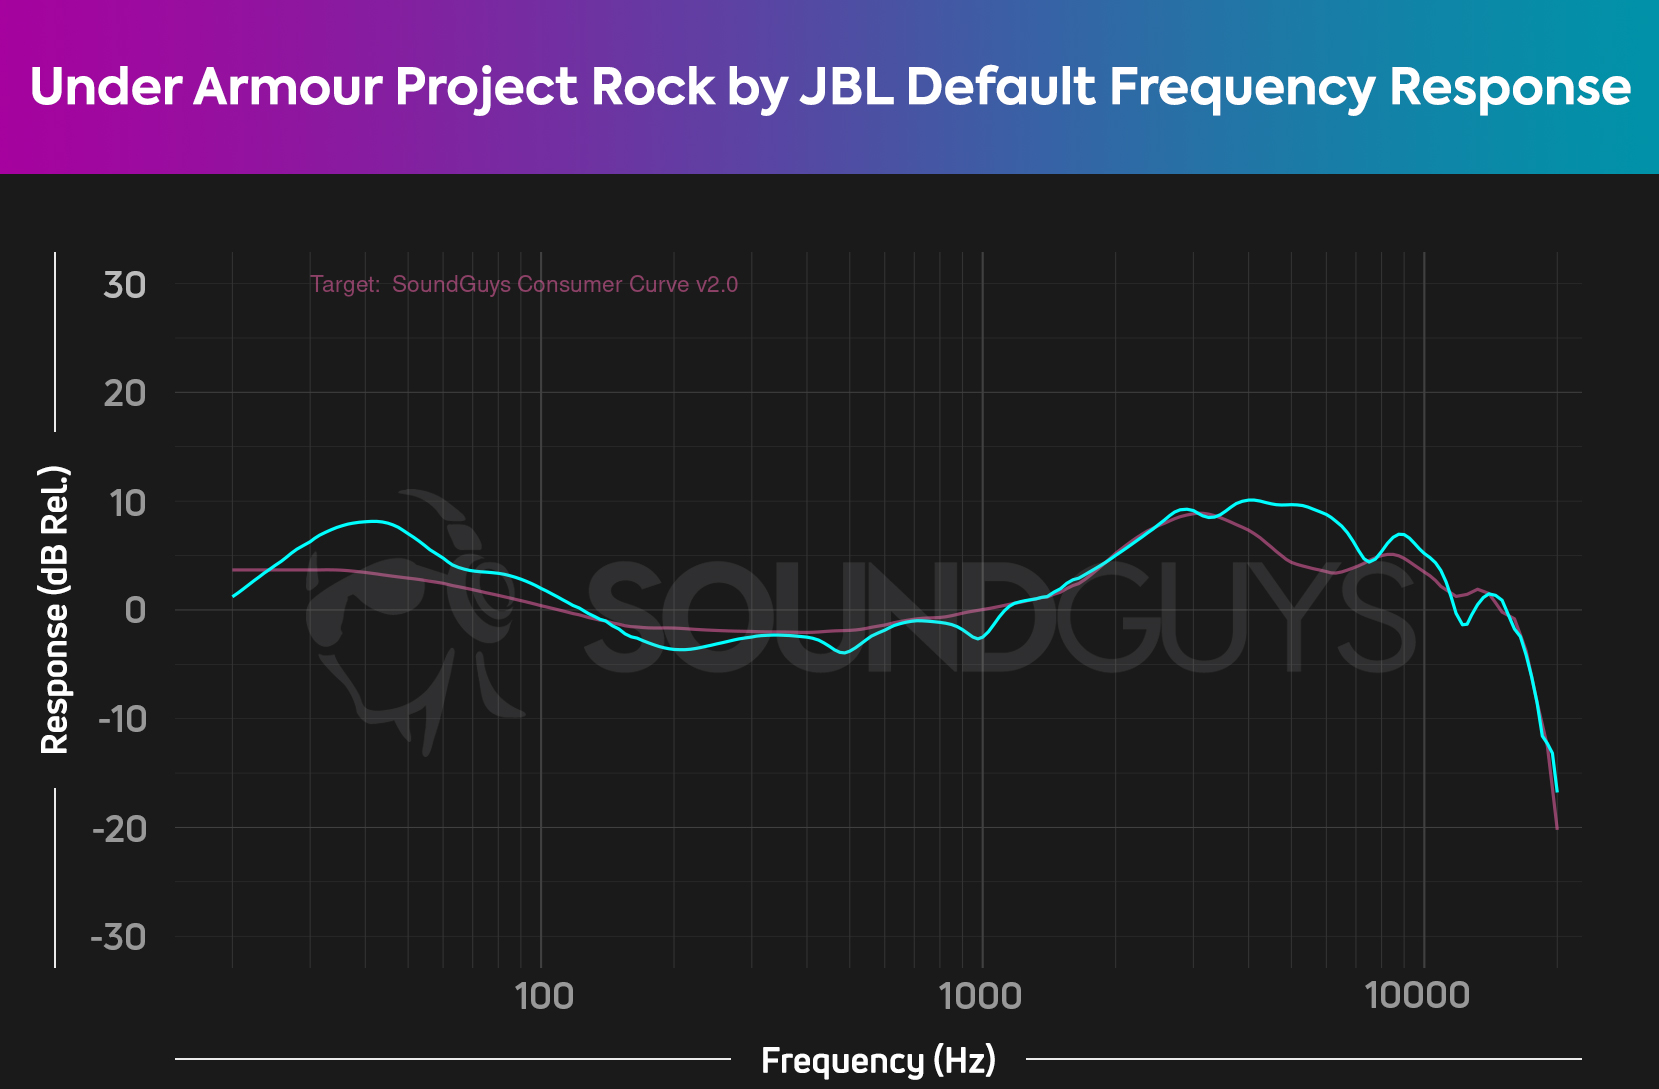 Image shows SoundGuys ideal frequency response and Under Armour Project Rock by JBL default frequency response, which are similar though the JBL has more bass and more treble emphasis, generally.